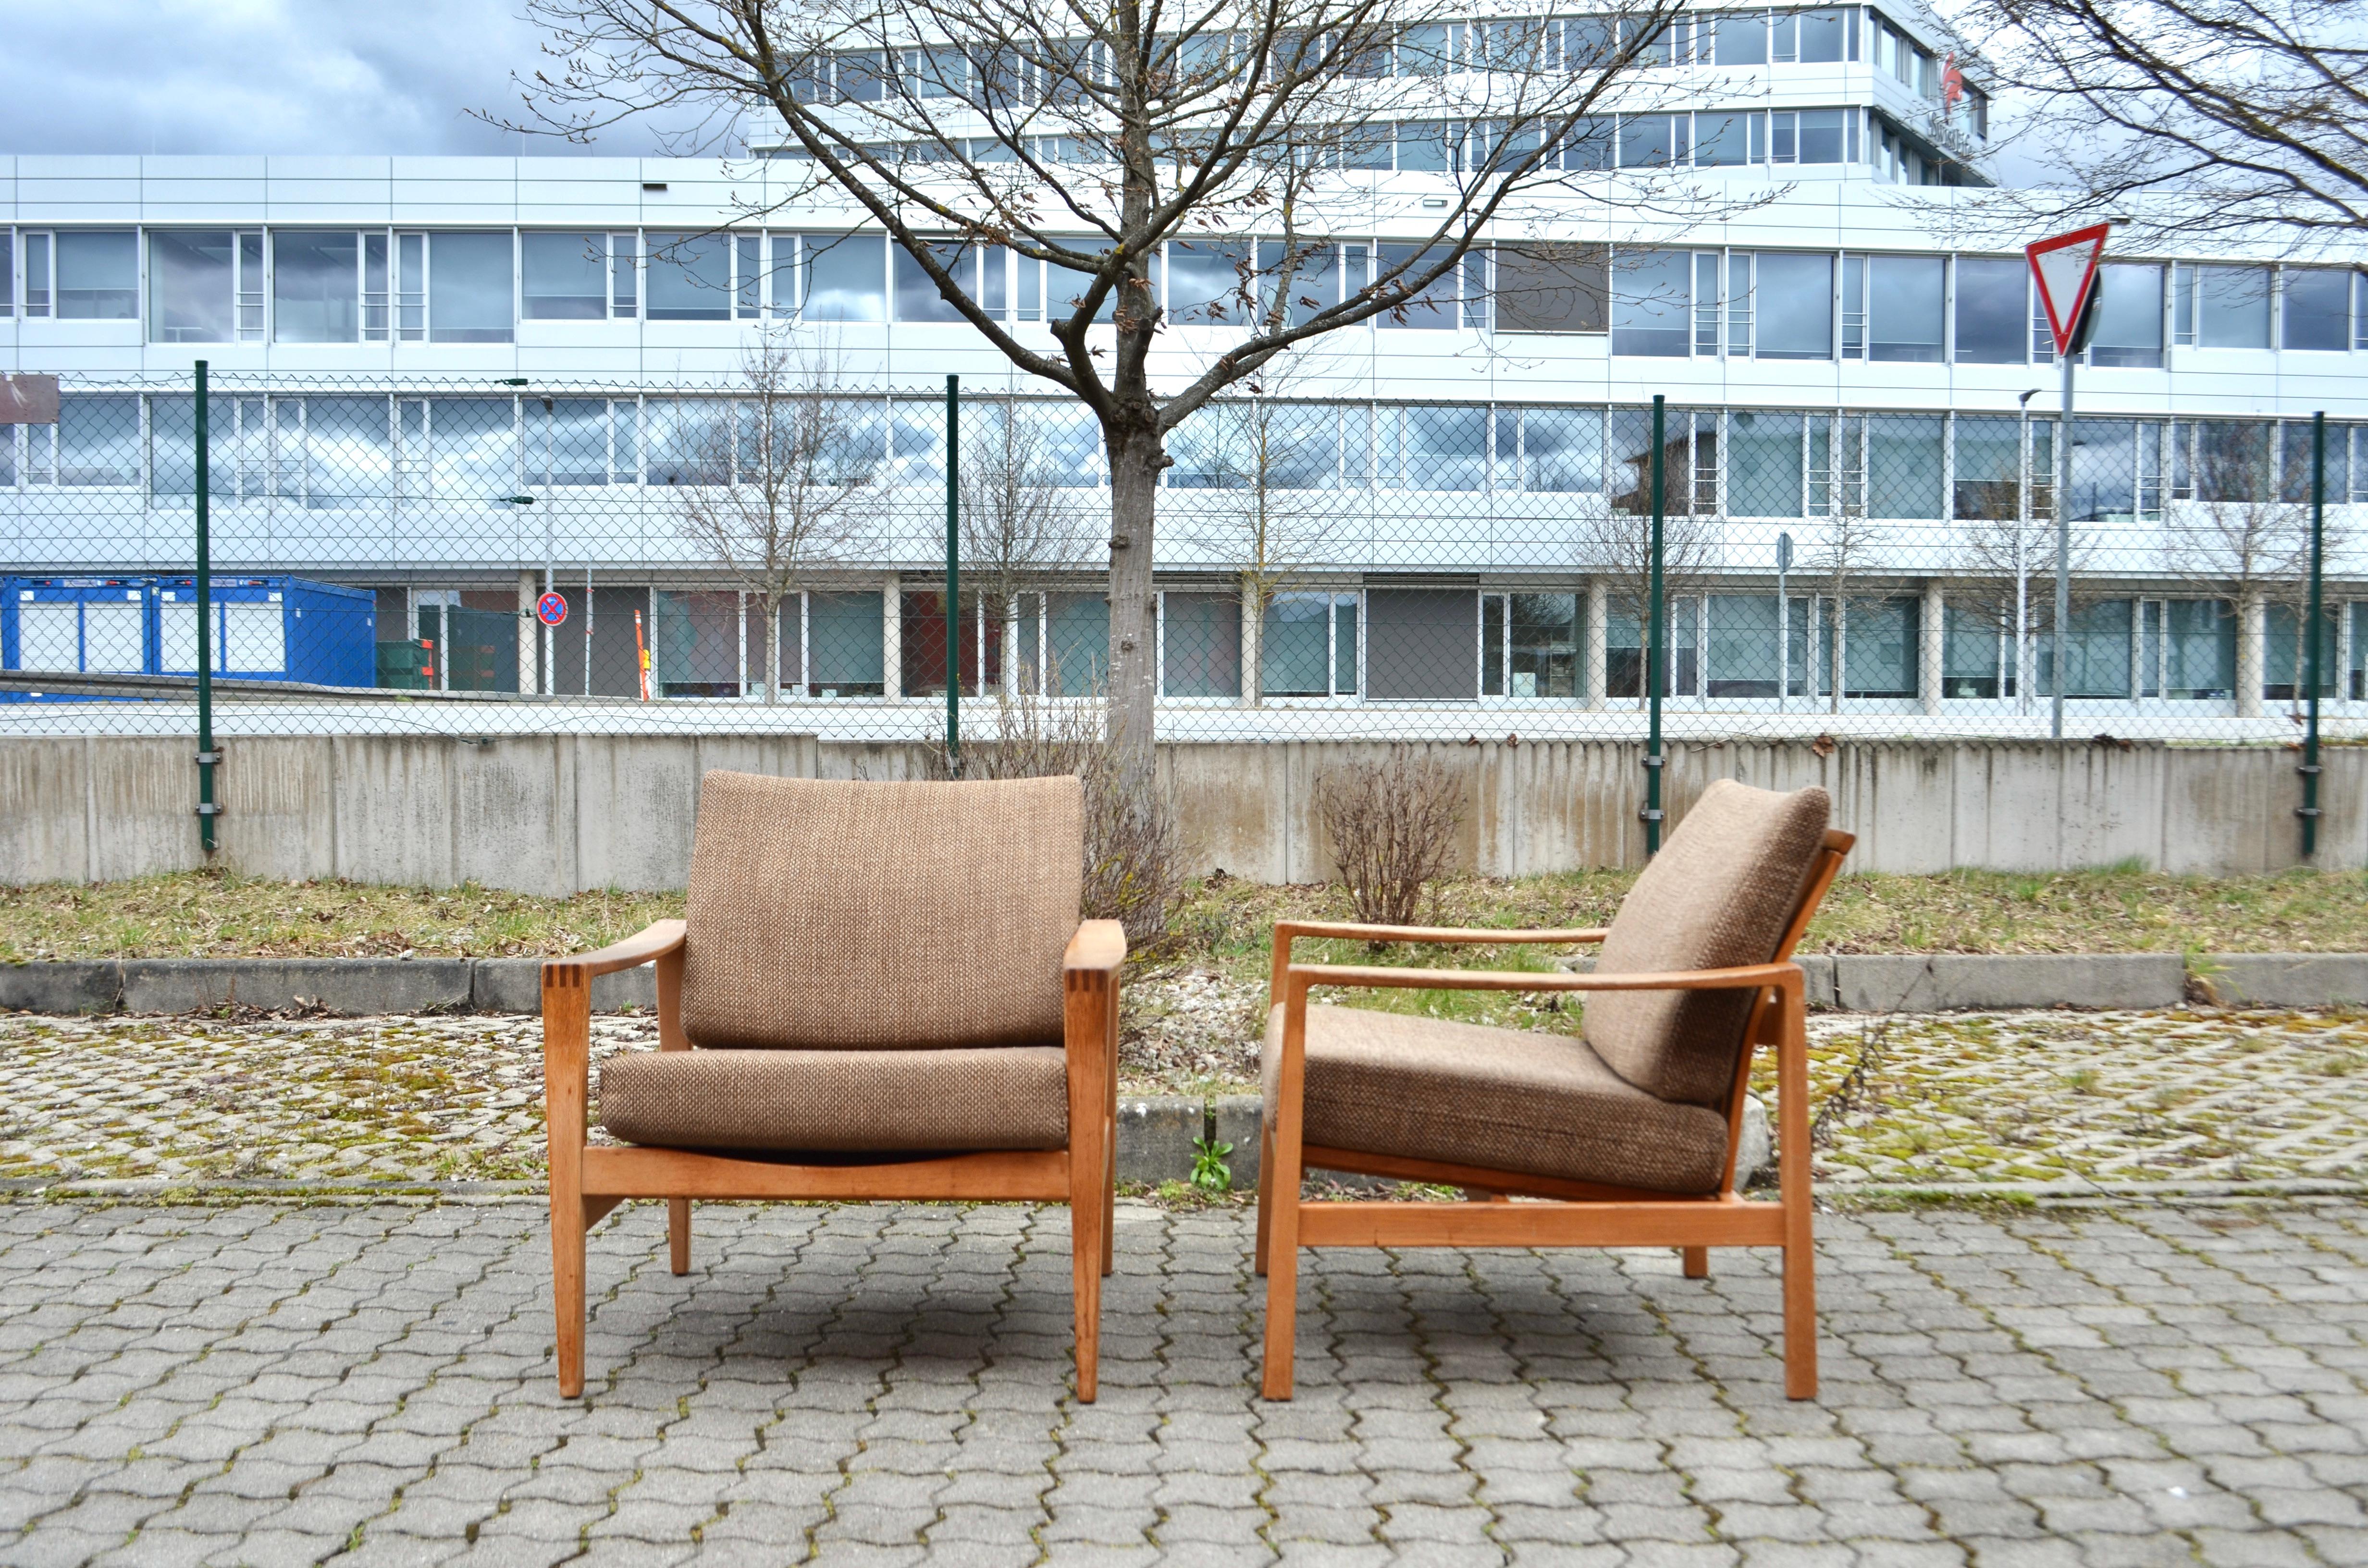 Rare easy lounge chair designed by Hartmut Lohmeyer for Wilkhahn.
Minimalistic Design.
Oak wood and brown wool.
Beautiful Patina on the wood.
A very comfortable seating comfort.
Price per Item
We have 2 matching chairs in stock.
Also the 3